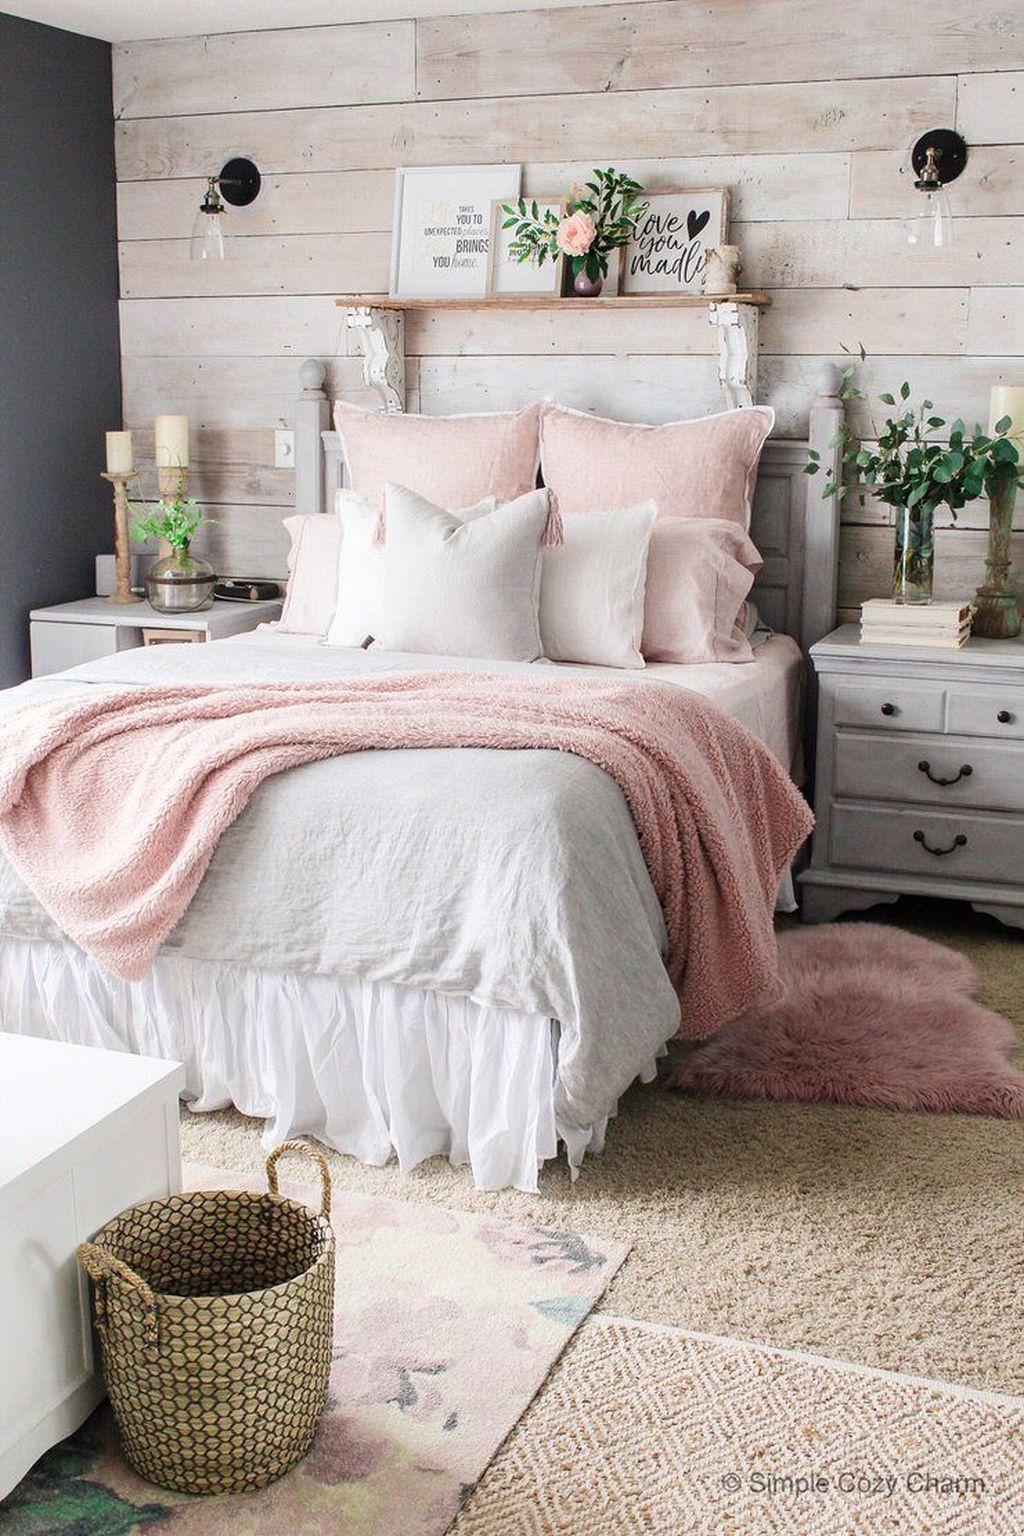 34 Inspiring DIY Bedroom Decor Ideas You Can Try -   17 room decor Inspiration bedroom ideas